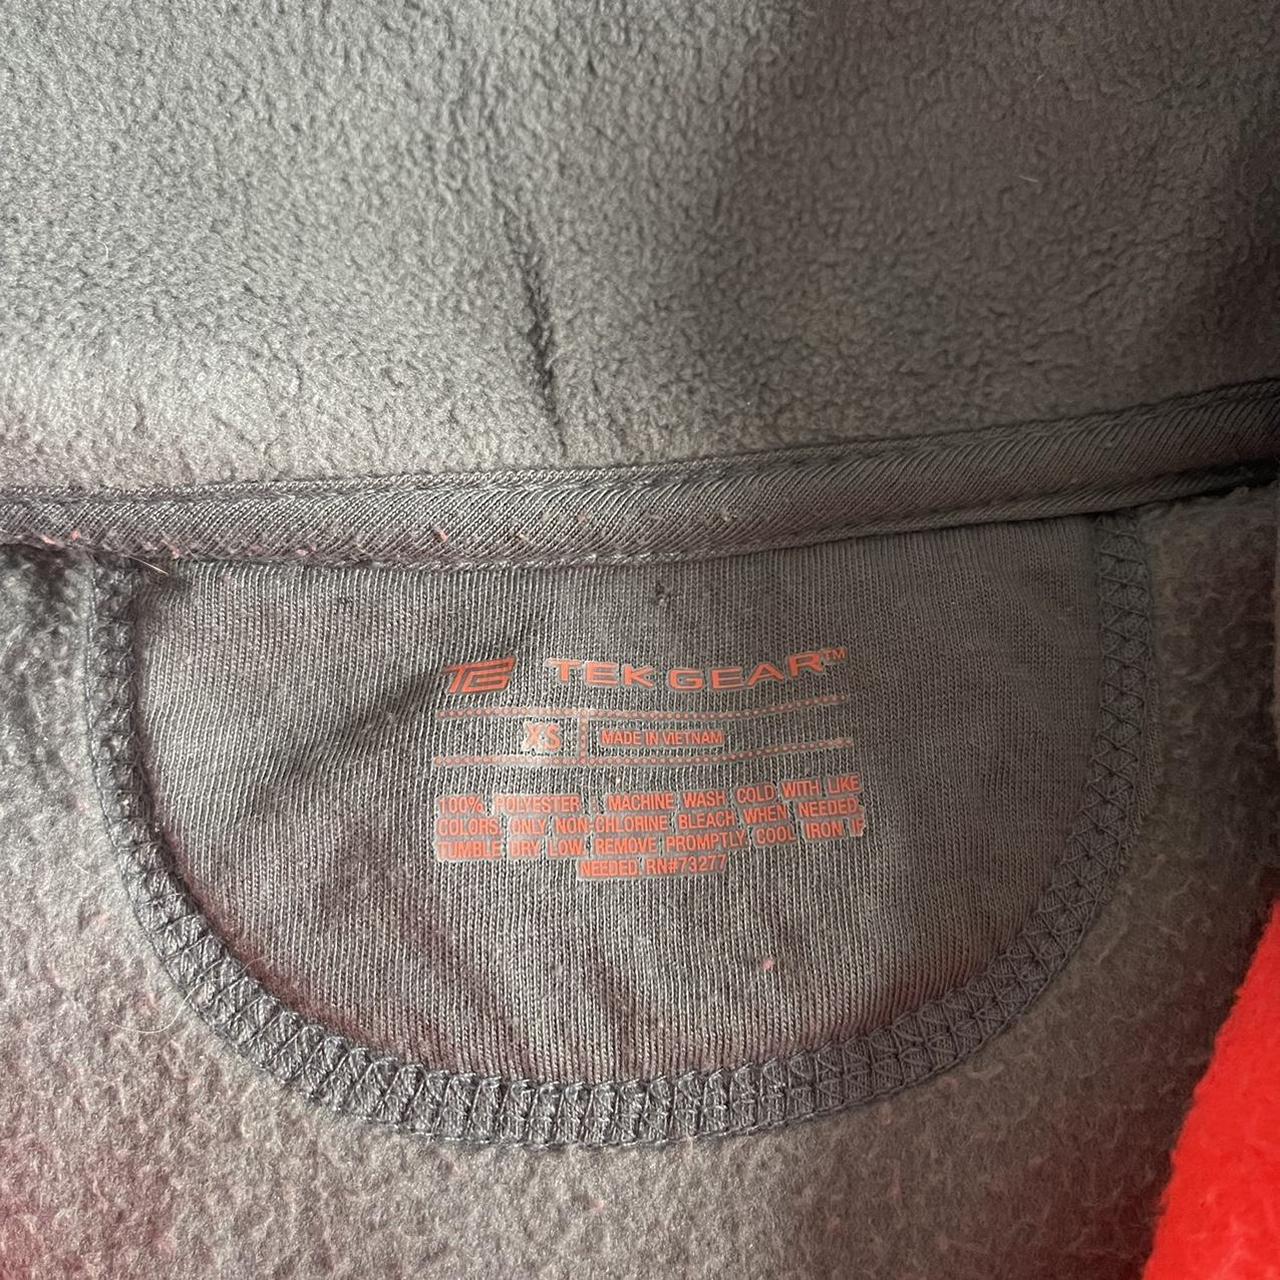 Tek Gear Coral and Gray Zip Up Sweater Very cozy - Depop